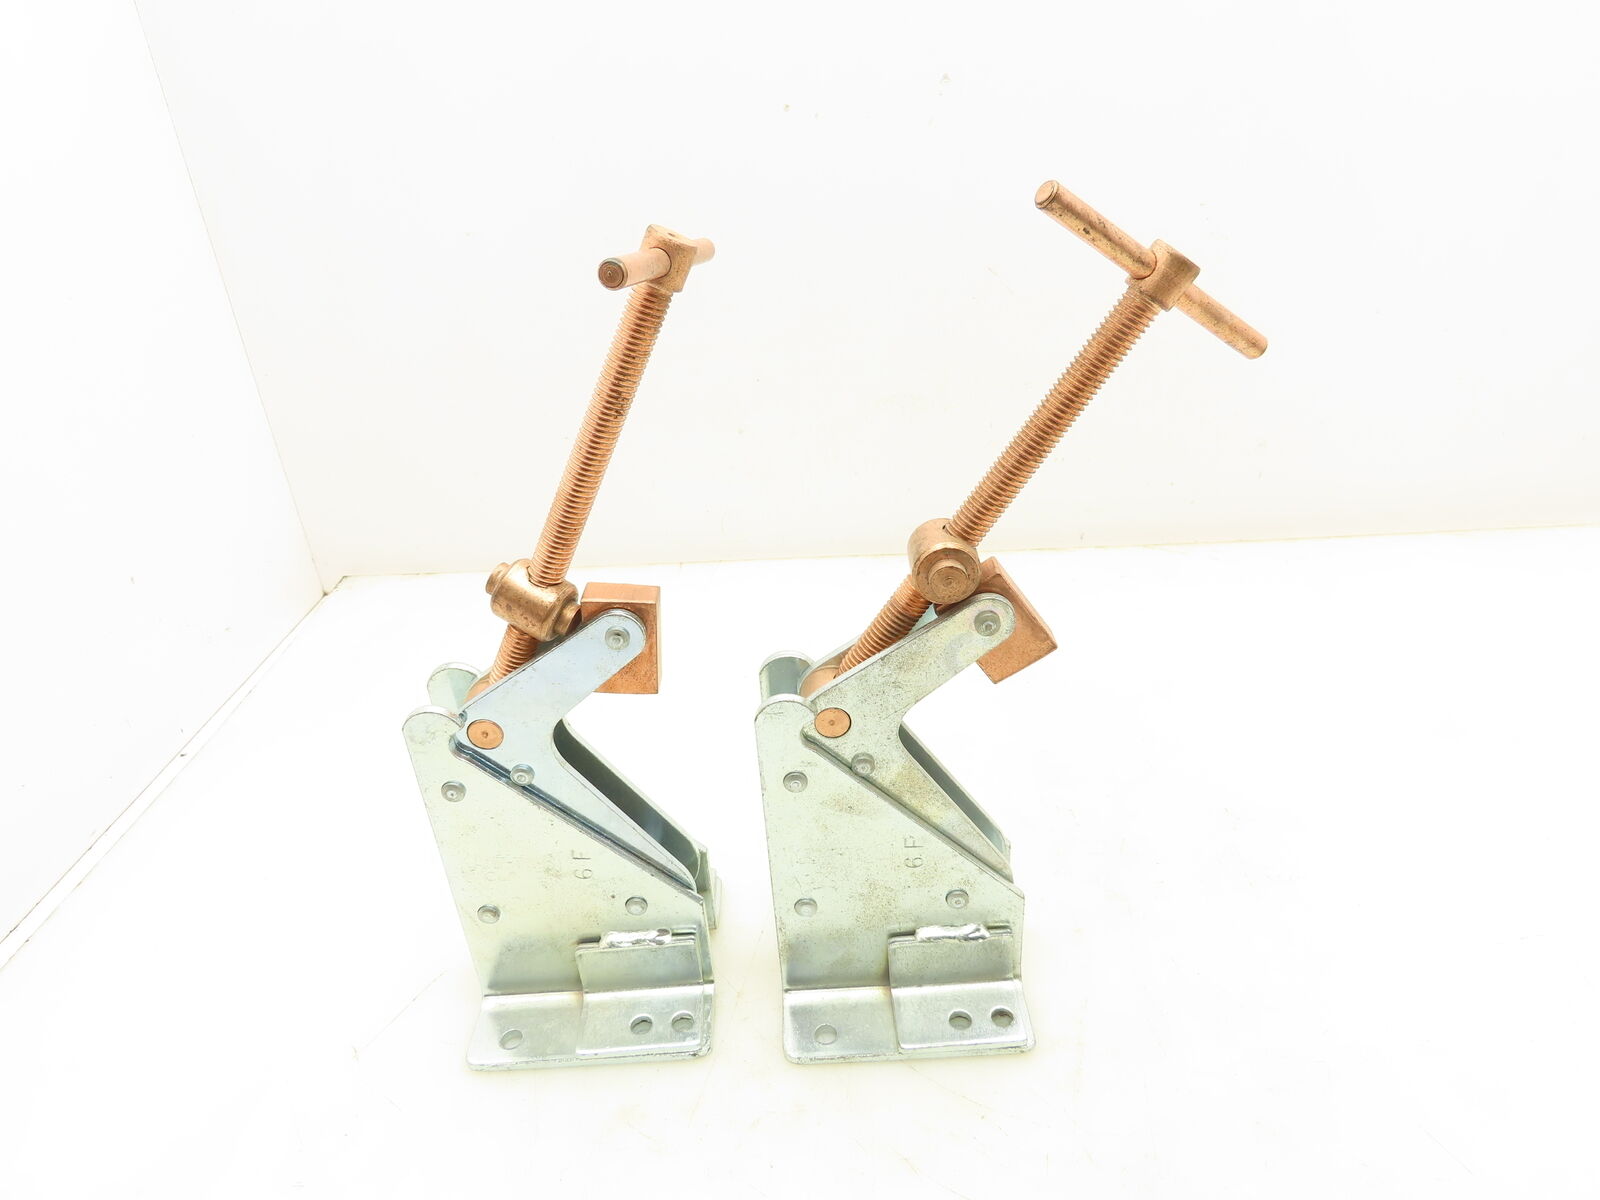 Kant-twist 6f Quick Acting Fixture Clamp Copper Jaw 6" Opening  Lot Of 2